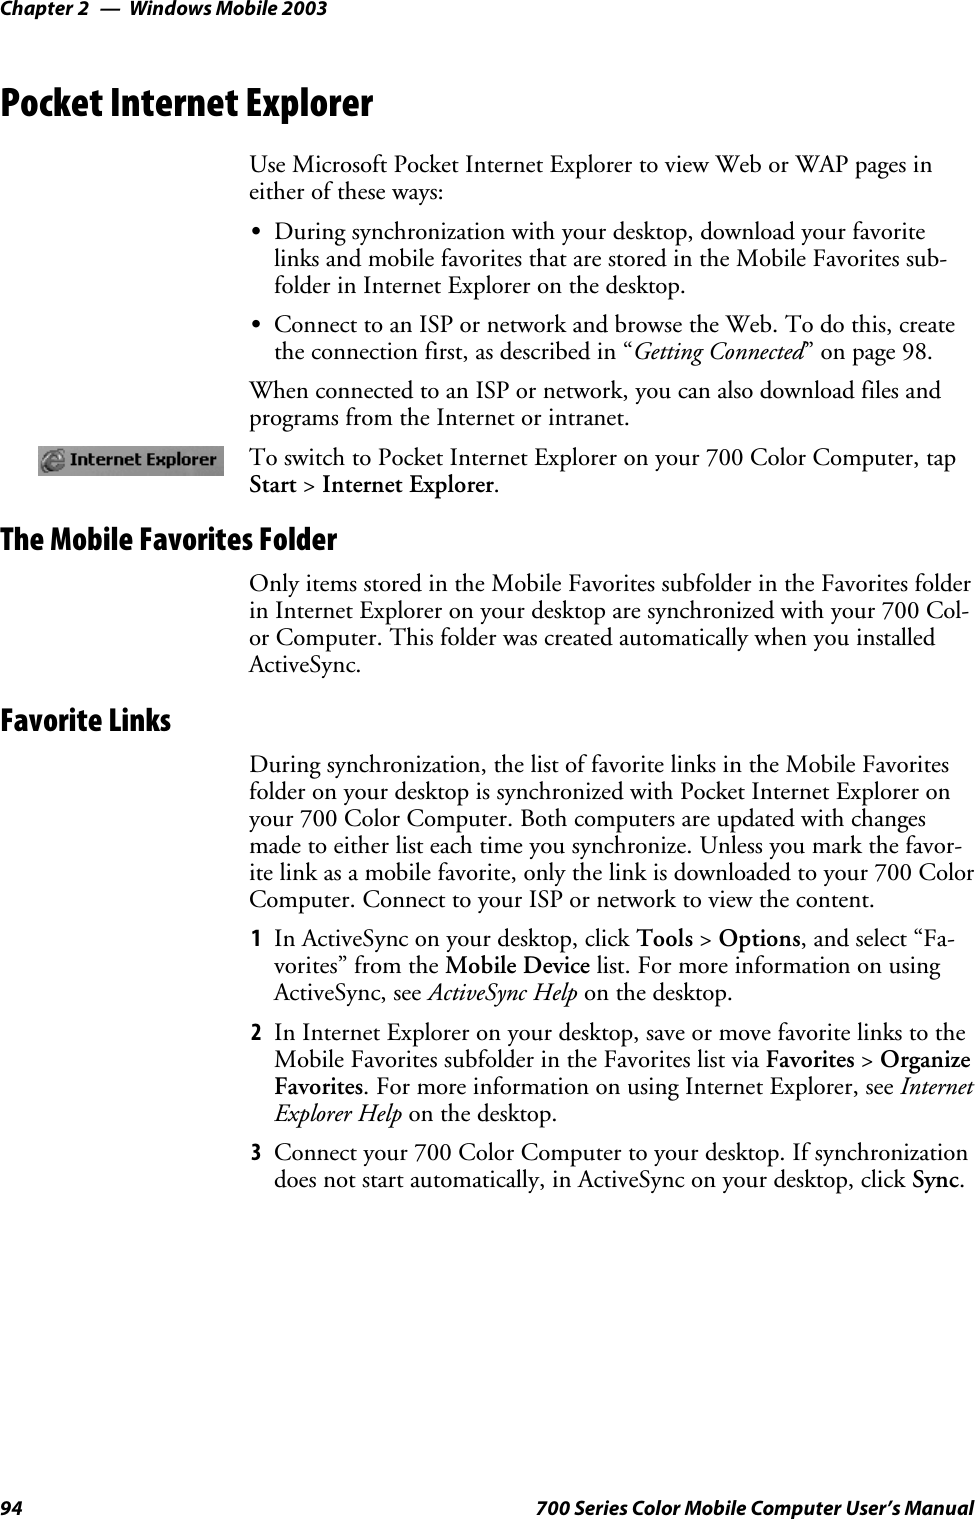 Windows Mobile 2003Chapter —294 700 Series Color Mobile Computer User’s ManualPocket Internet ExplorerUse Microsoft Pocket Internet Explorer to view Web or WAP pages ineither of these ways:SDuring synchronization with your desktop, download your favoritelinks and mobile favorites that are stored in the Mobile Favorites sub-folder in Internet Explorer on the desktop.SConnect to an ISP or network and browse the Web. To do this, createthe connection first, as described in “Getting Connected” on page 98.When connected to an ISP or network, you can also download files andprograms from the Internet or intranet.To switch to Pocket Internet Explorer on your 700 Color Computer, tapStart &gt;Internet Explorer.The Mobile Favorites FolderOnly items stored in the Mobile Favorites subfolder in the Favorites folderin Internet Explorer on your desktop are synchronized with your 700 Col-or Computer. This folder was created automatically when you installedActiveSync.Favorite LinksDuring synchronization, the list of favorite links in the Mobile Favoritesfolder on your desktop is synchronized with Pocket Internet Explorer onyour 700 Color Computer. Both computers are updated with changesmade to either list each time you synchronize. Unless you mark the favor-ite link as a mobile favorite, only the link is downloaded to your 700 ColorComputer. Connect to your ISP or network to view the content.1In ActiveSync on your desktop, click Tools &gt;Options, and select “Fa-vorites” from the Mobile Device list. For more information on usingActiveSync, see ActiveSync Help on the desktop.2In Internet Explorer on your desktop, save or move favorite links to theMobile Favorites subfolder in the Favorites list via Favorites &gt;OrganizeFavorites. For more information on using Internet Explorer, see InternetExplorer Help on the desktop.3Connect your 700 Color Computer to your desktop. If synchronizationdoes not start automatically, in ActiveSync on your desktop, click Sync.